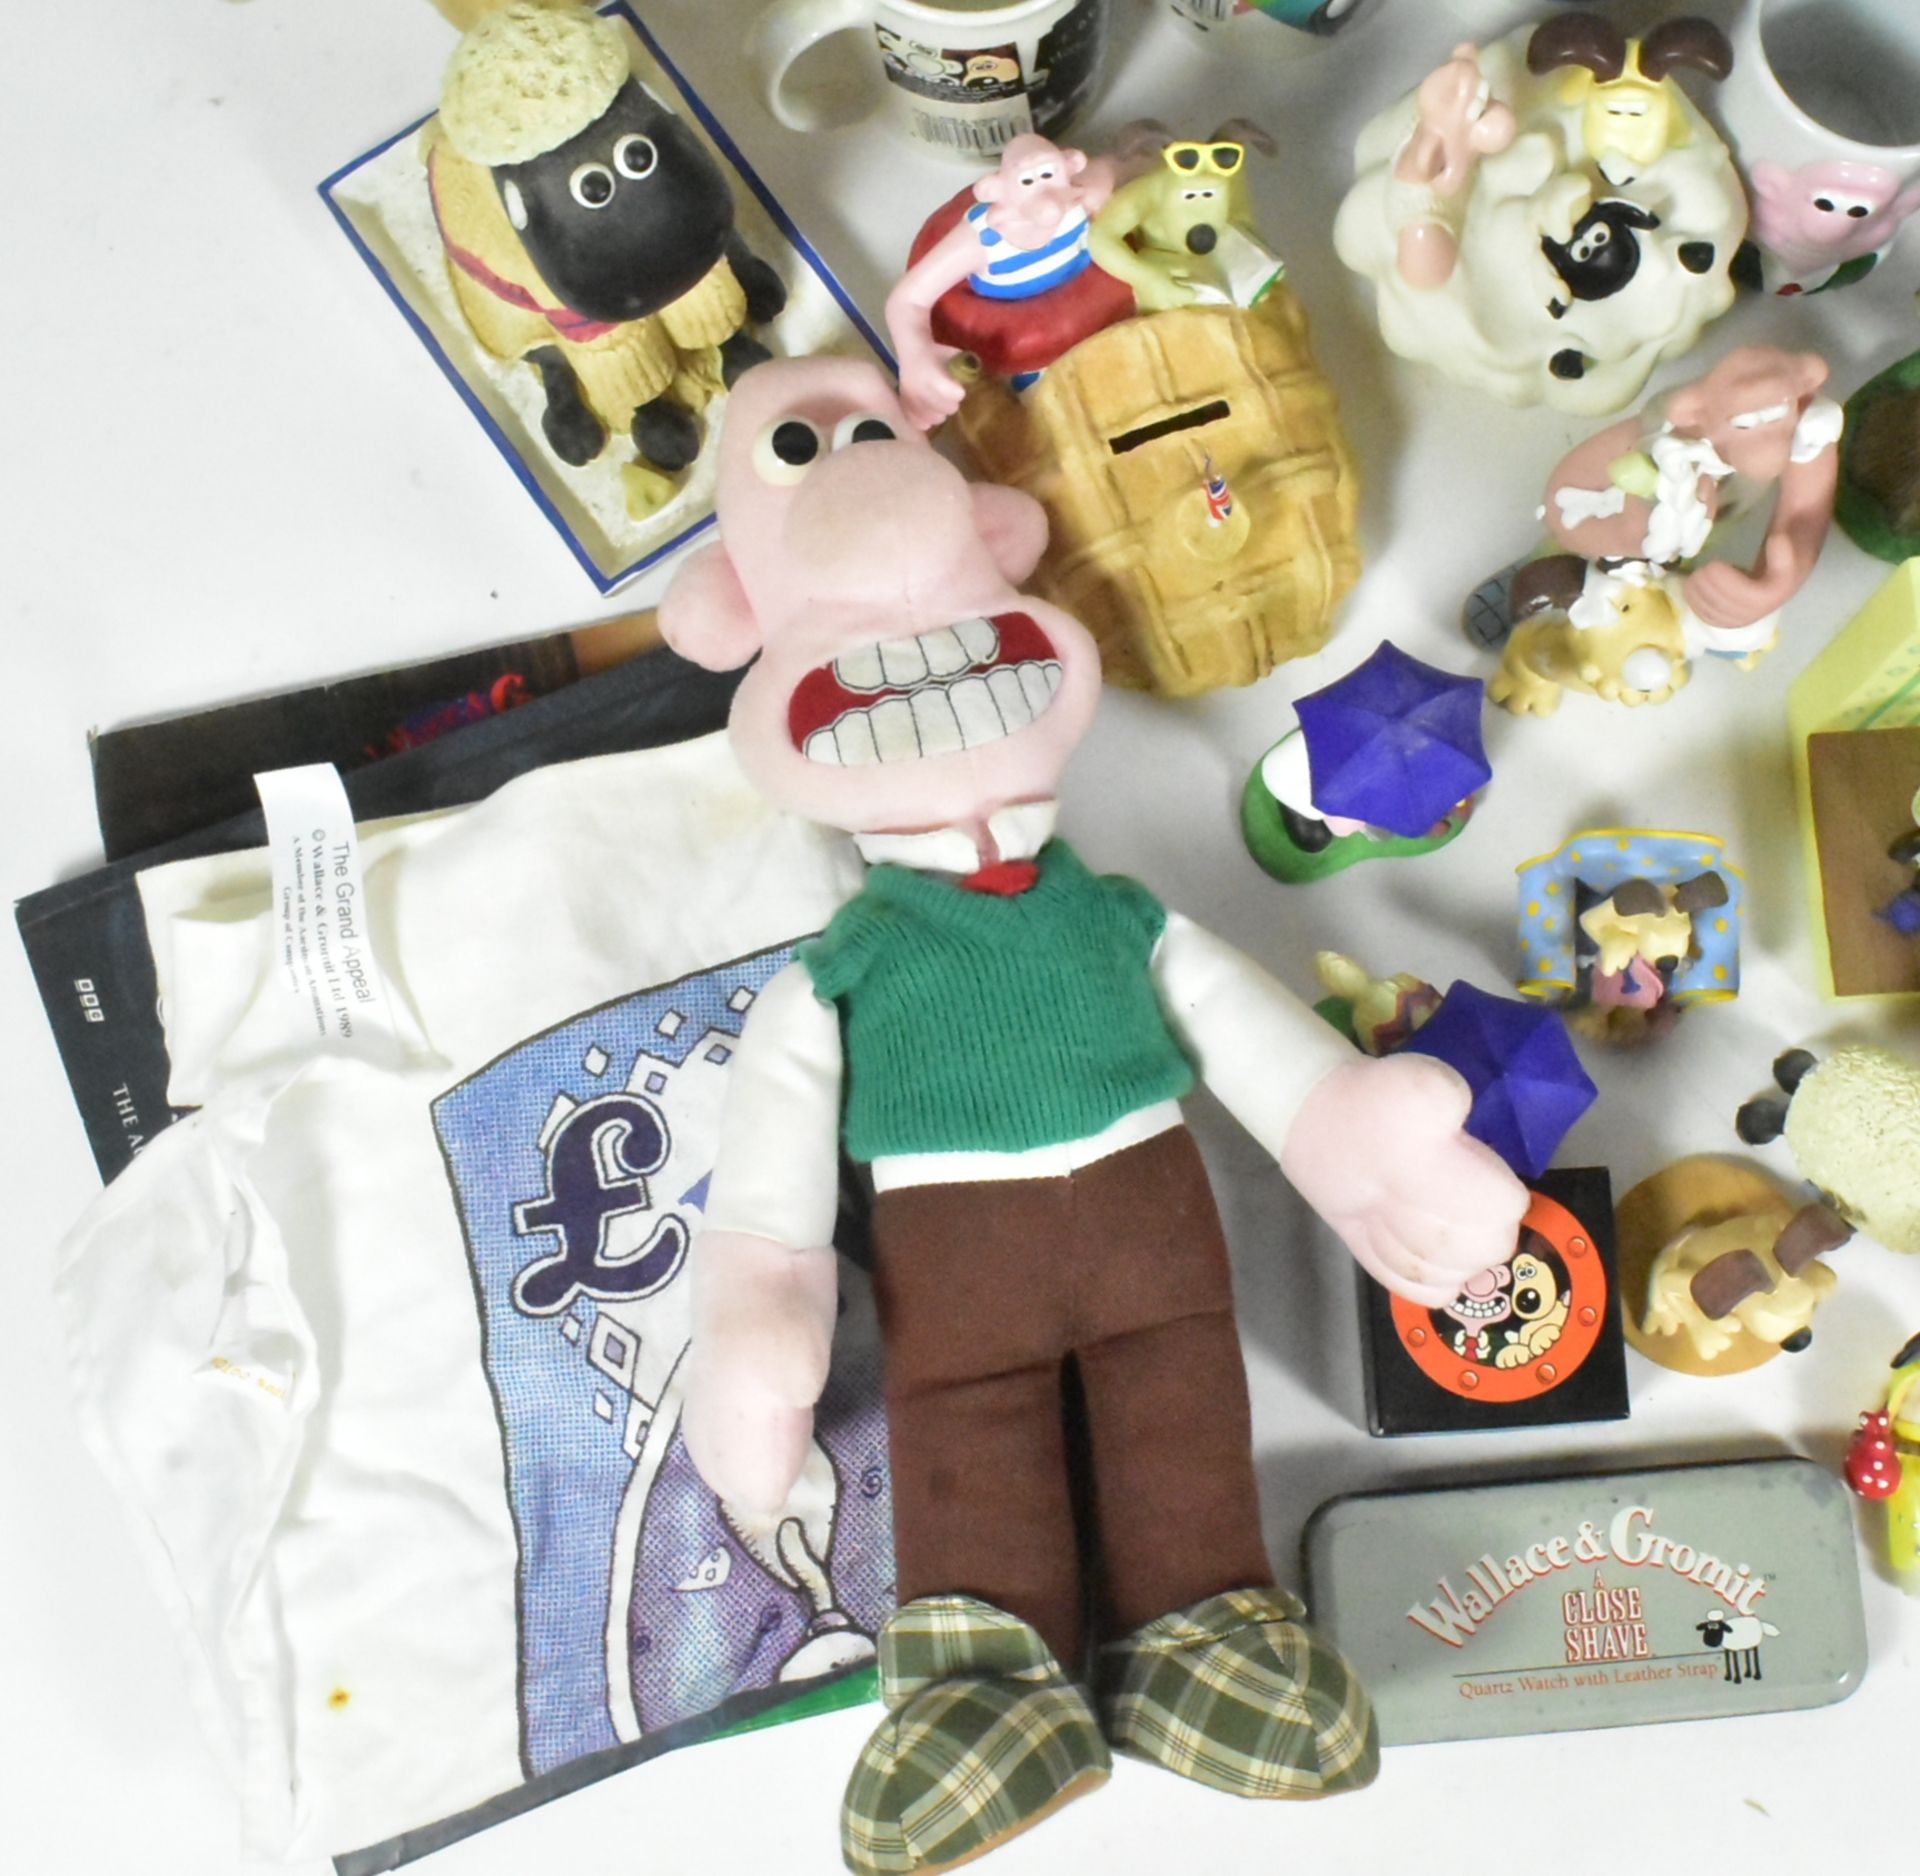 WALLACE & GROMIT - COLLECTION OF MEMORABILIA - Image 7 of 7